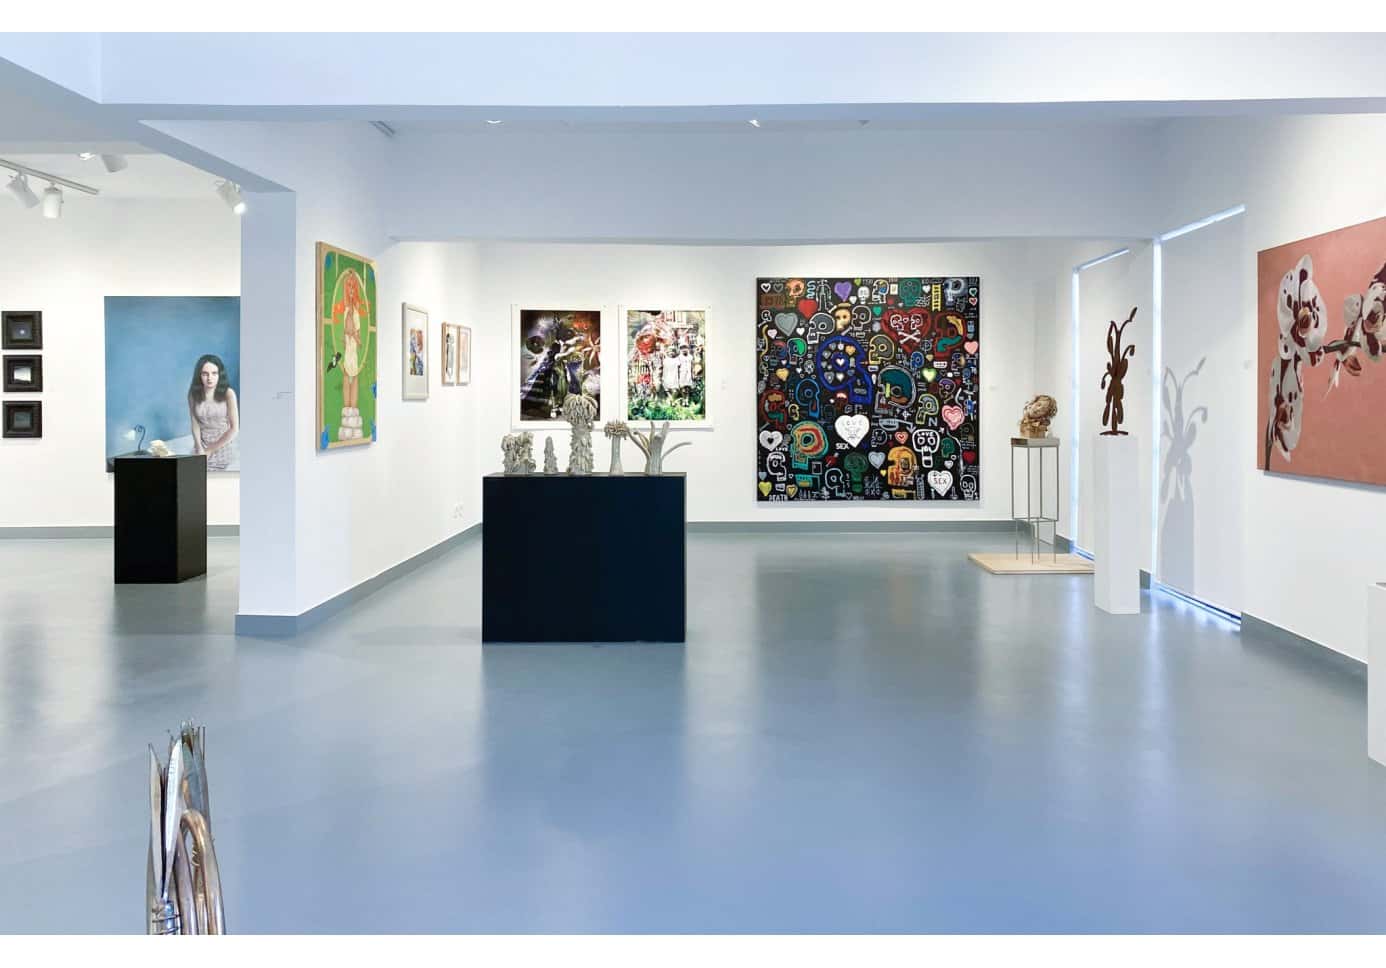 Townhouse Gallery and Contemporary Art Scene